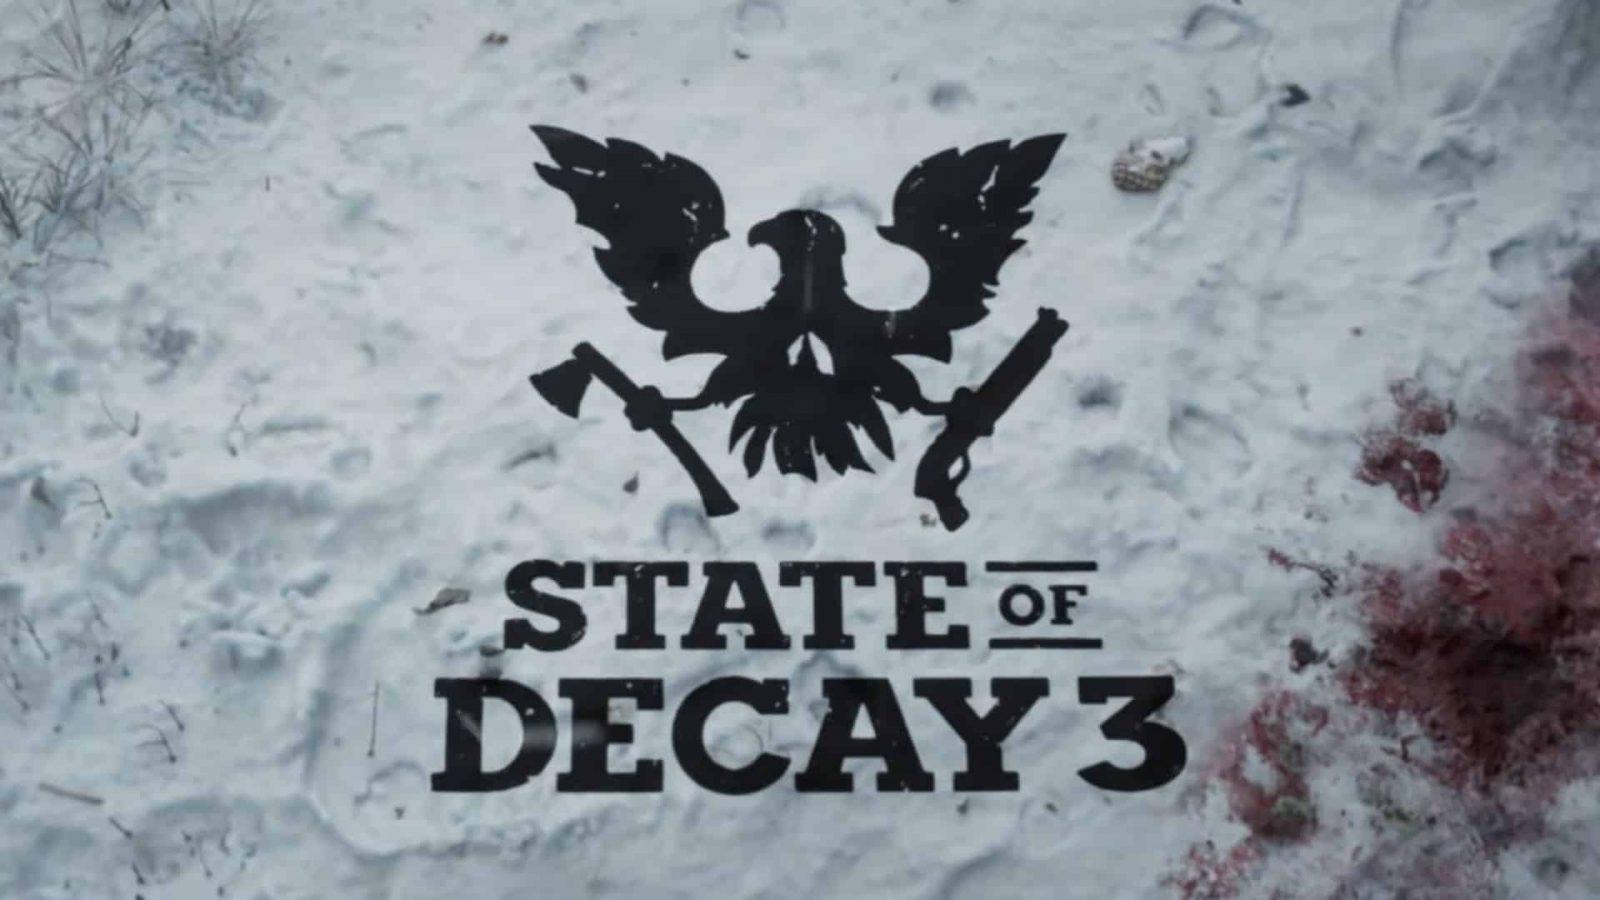 State of Decay 3 Officially Announced With Snowy CG Trailer